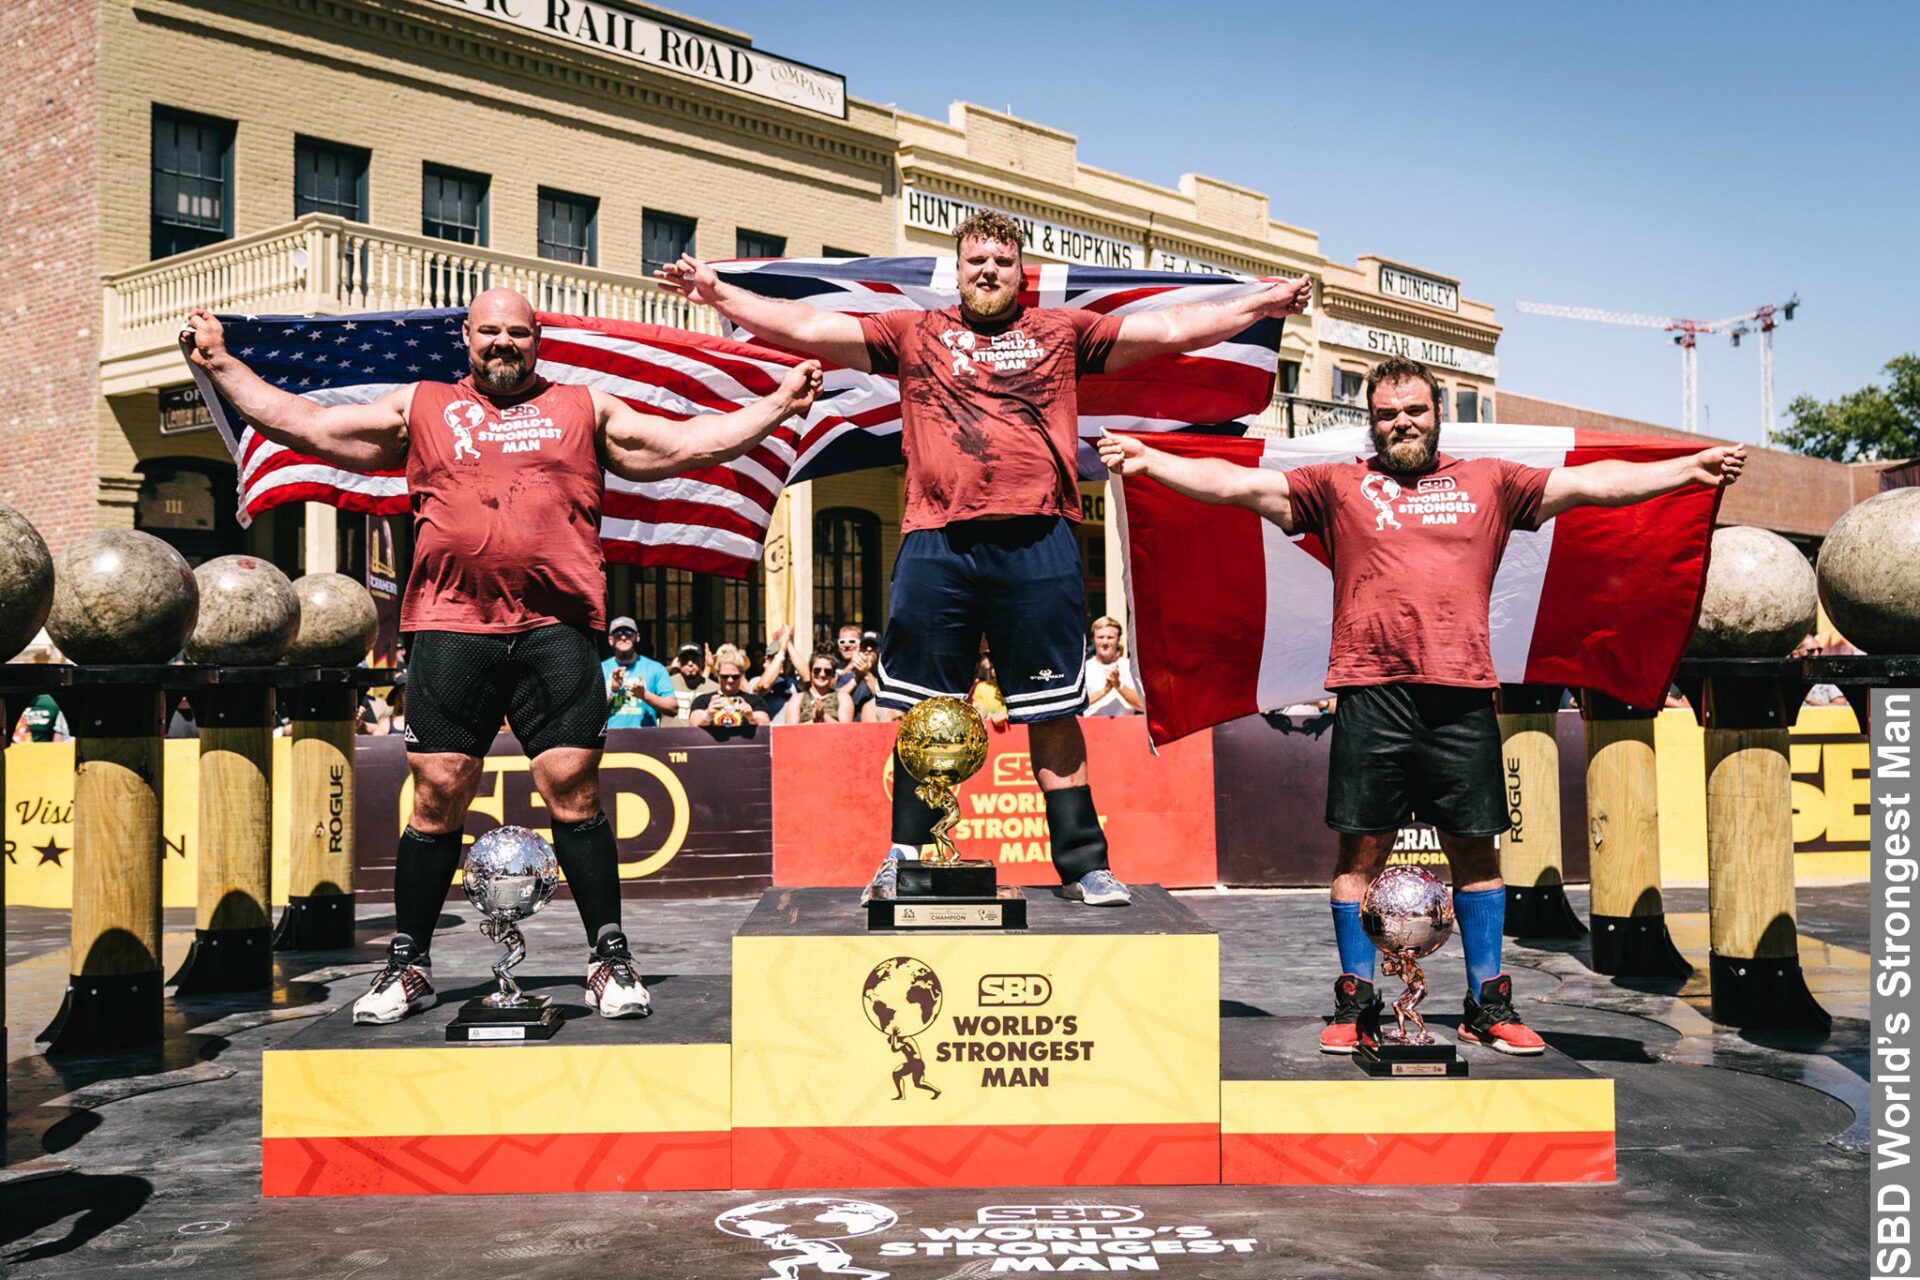 World’s Strongest Man Has Autism, World’s Strongest Man Podium with all top 3